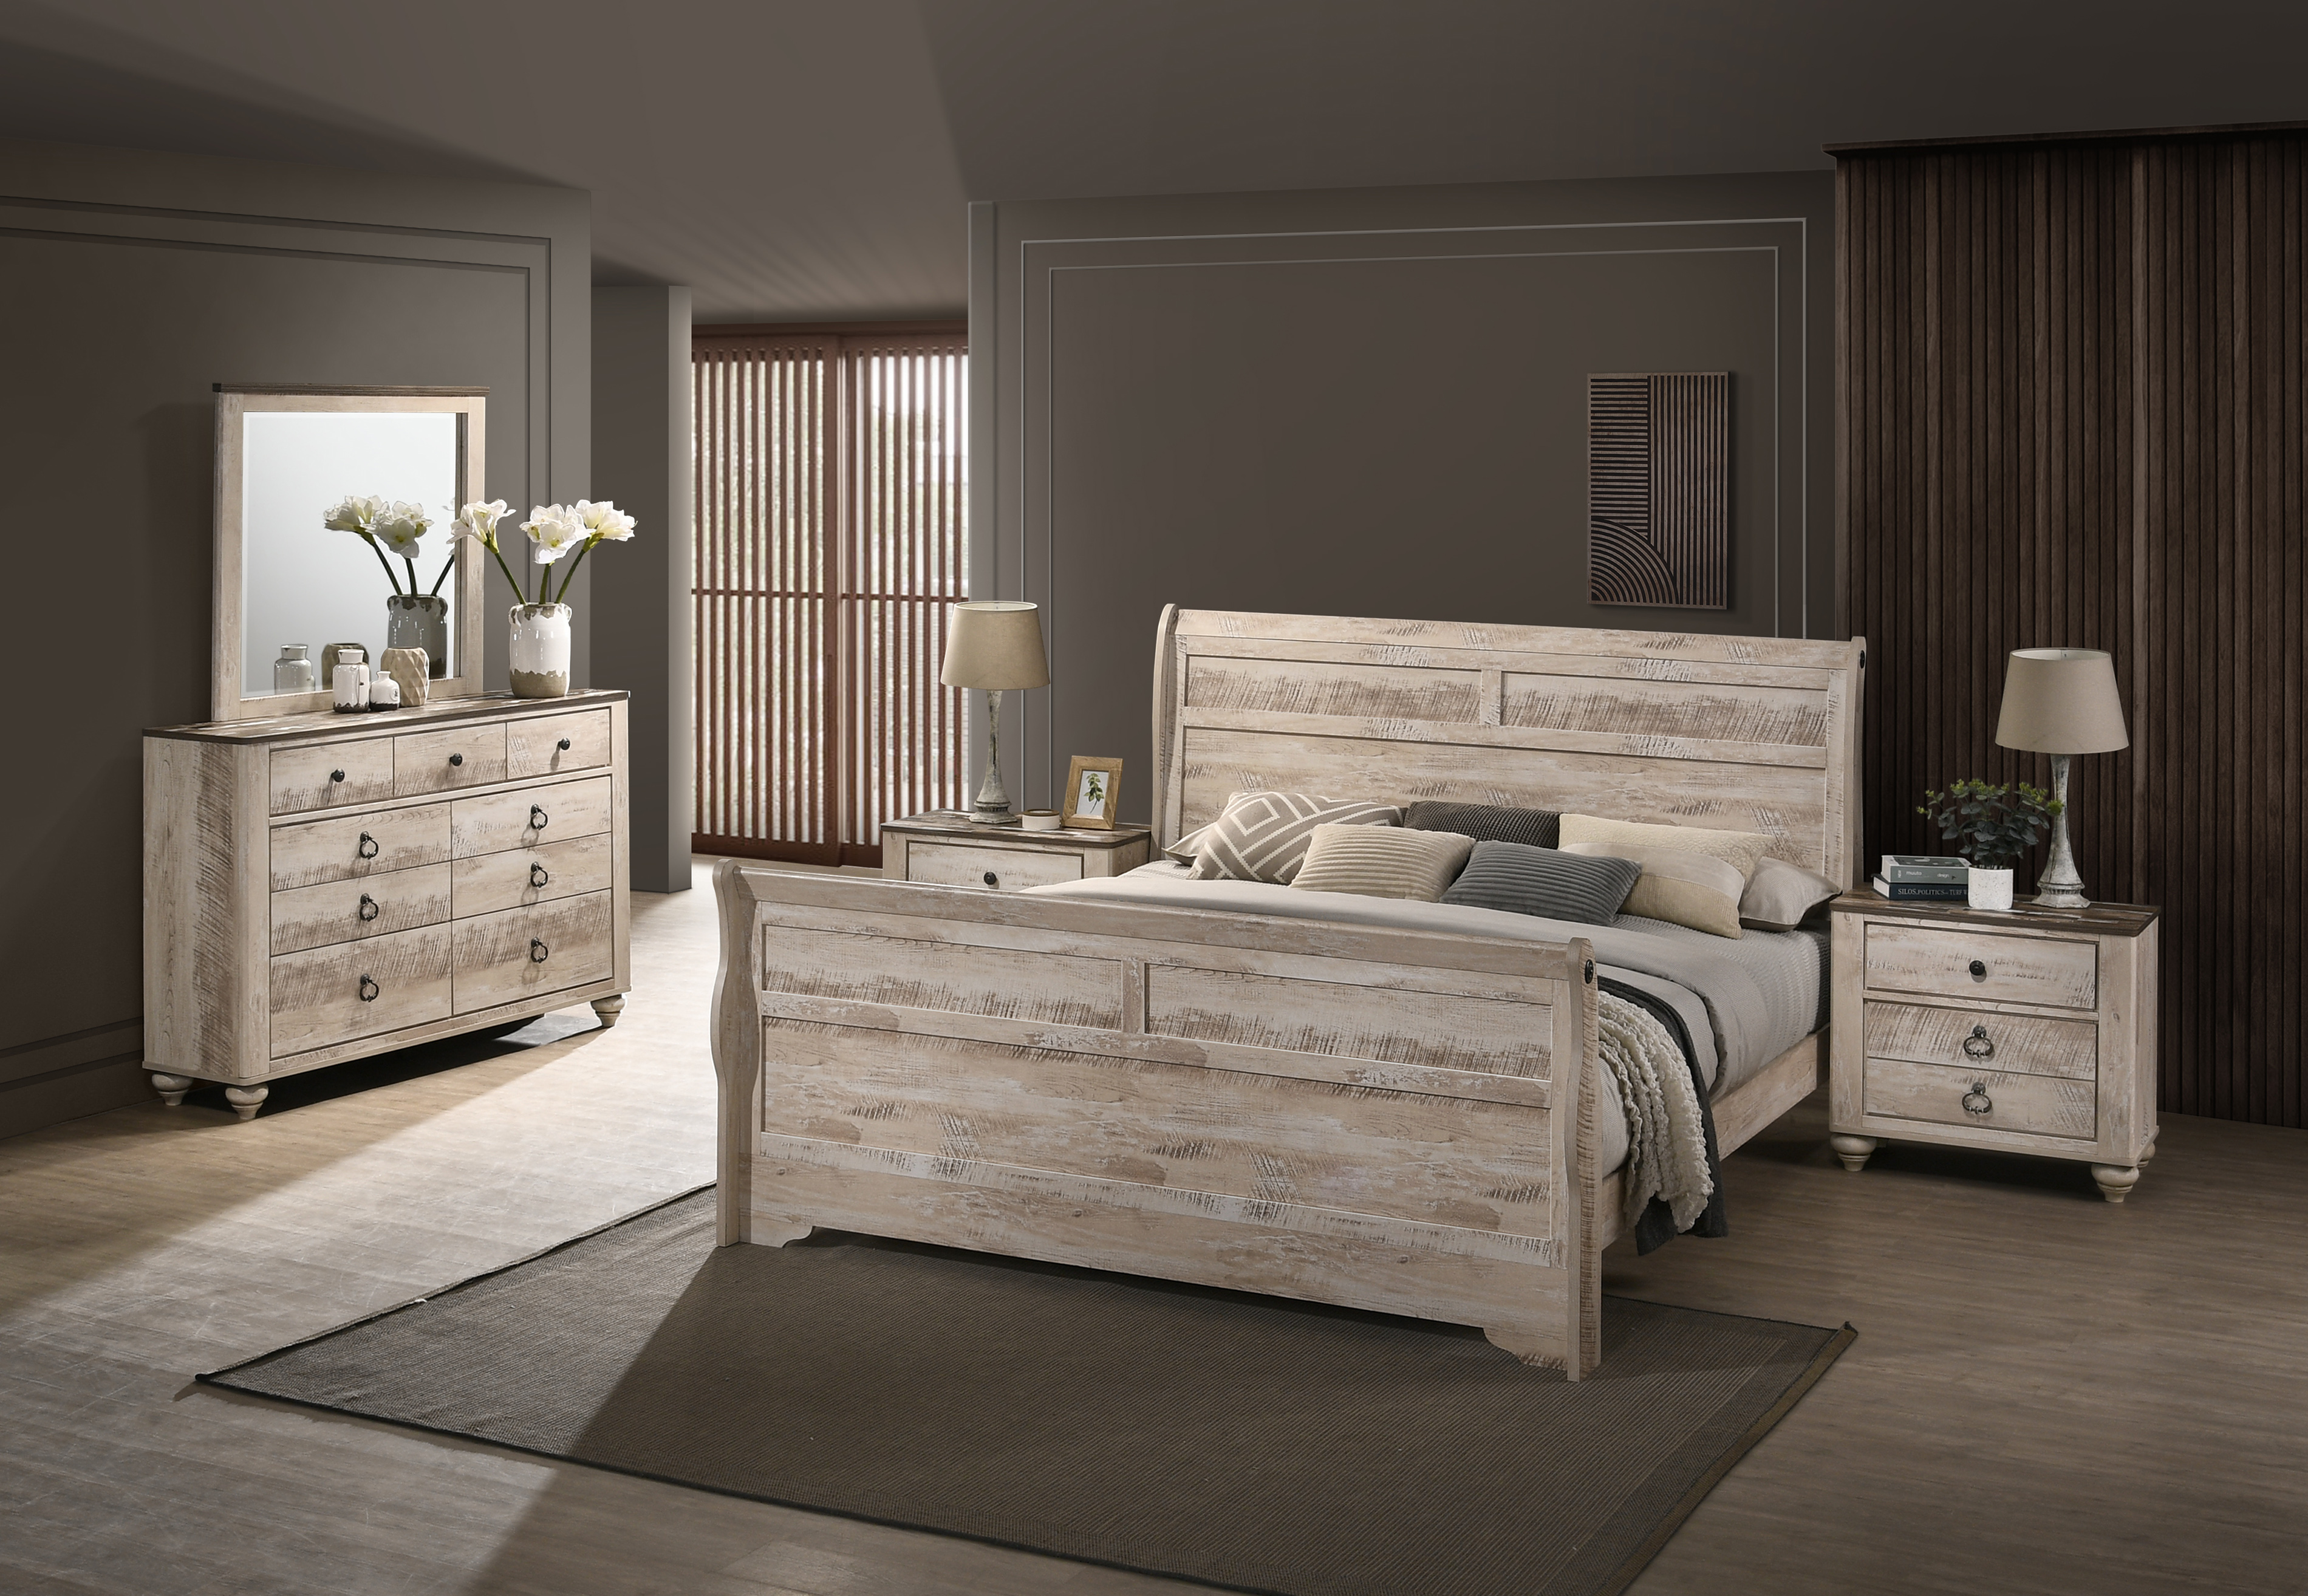 Imerland Contemporary White Wash Finish Bedroom Set with King Sleigh Bed, Dresser, Mirror, Two Nightstands - image 1 of 12